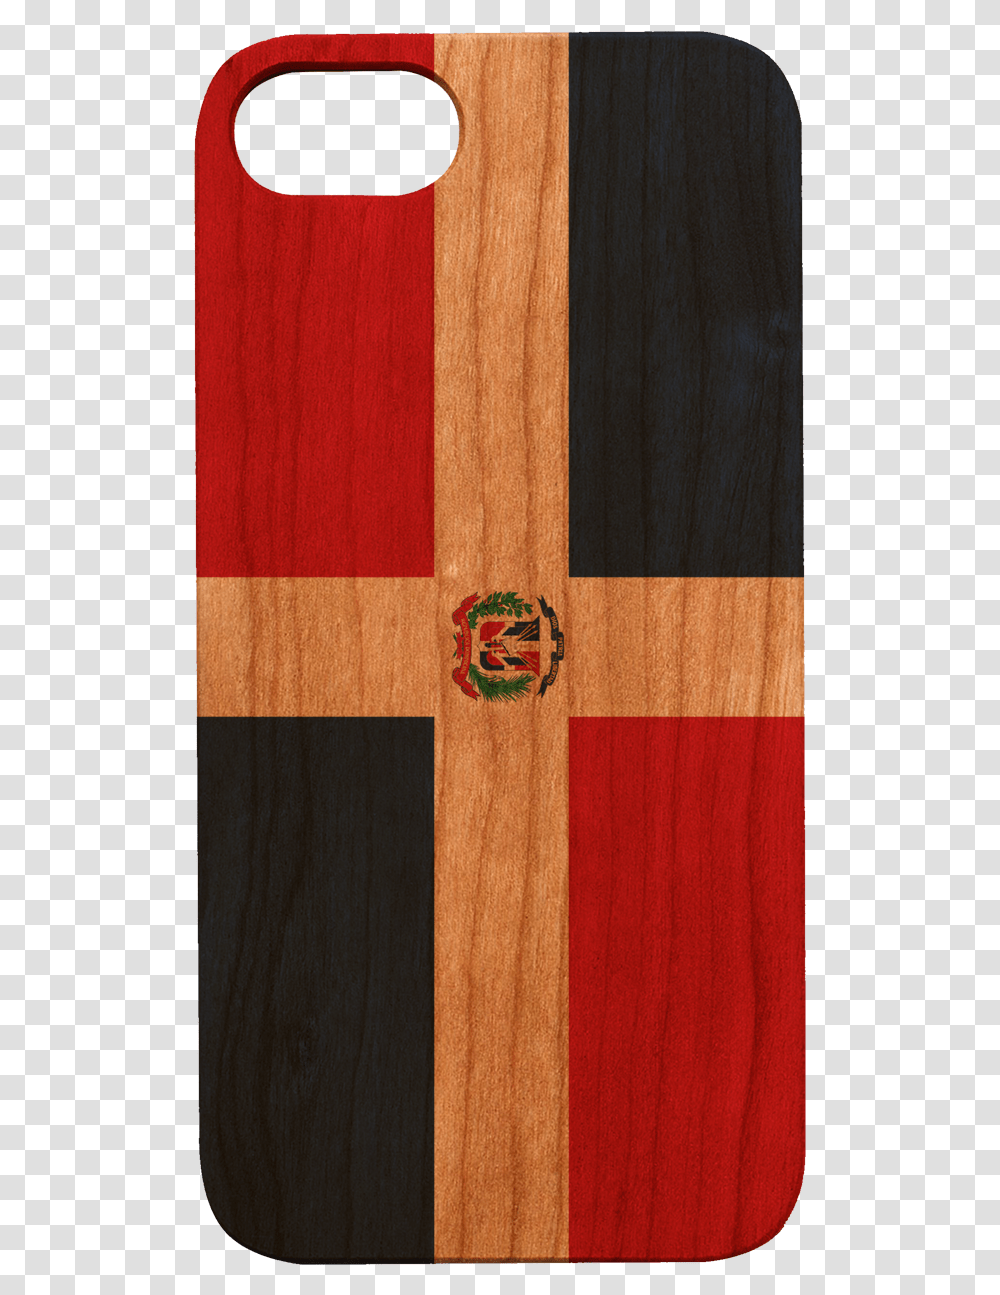 Cherry Wood Mobile Phone Case, Hardwood, Plywood, Stained Wood, Rug Transparent Png